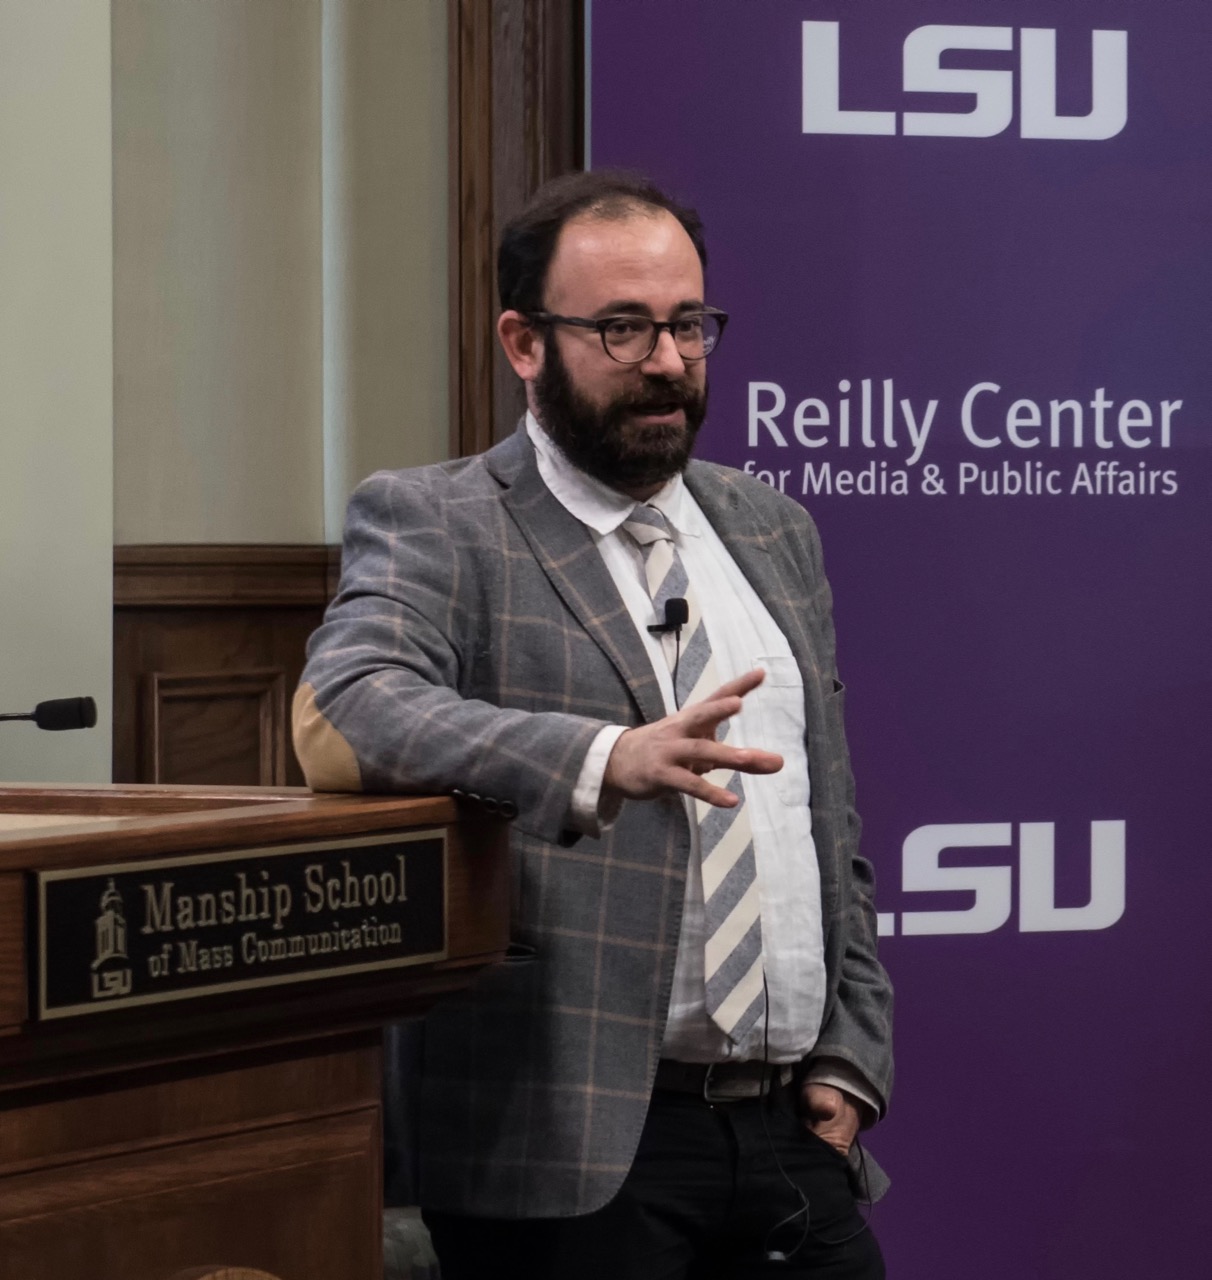 David Karpf discusses his book, Analytic Activism, during his visit to LSU's Manship School during the spring 2017 semester 